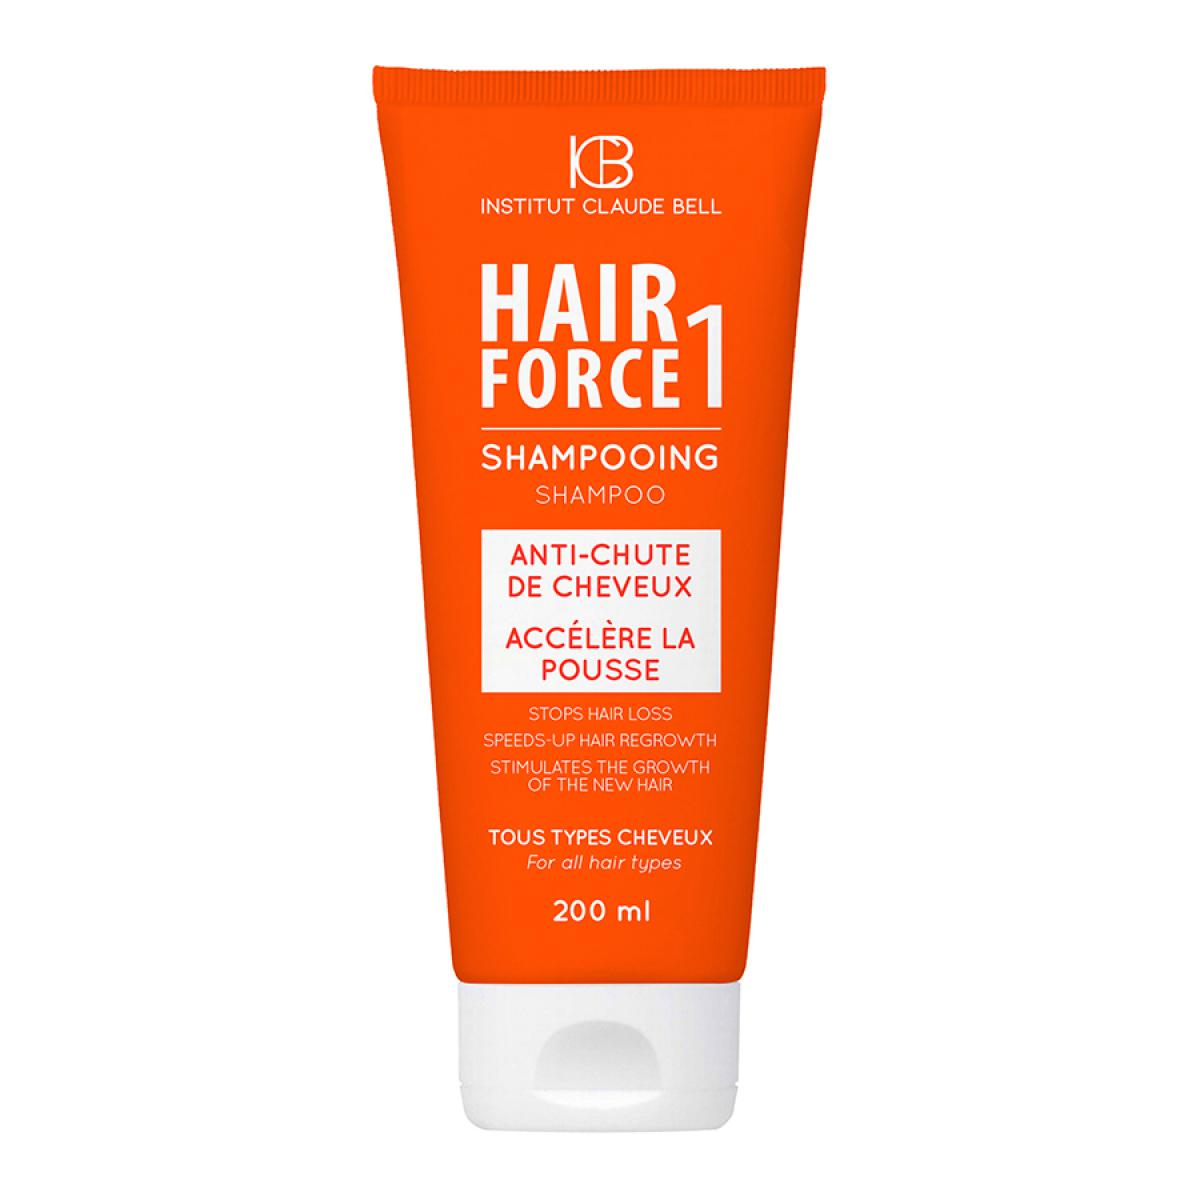  Hair Force One Shampoing